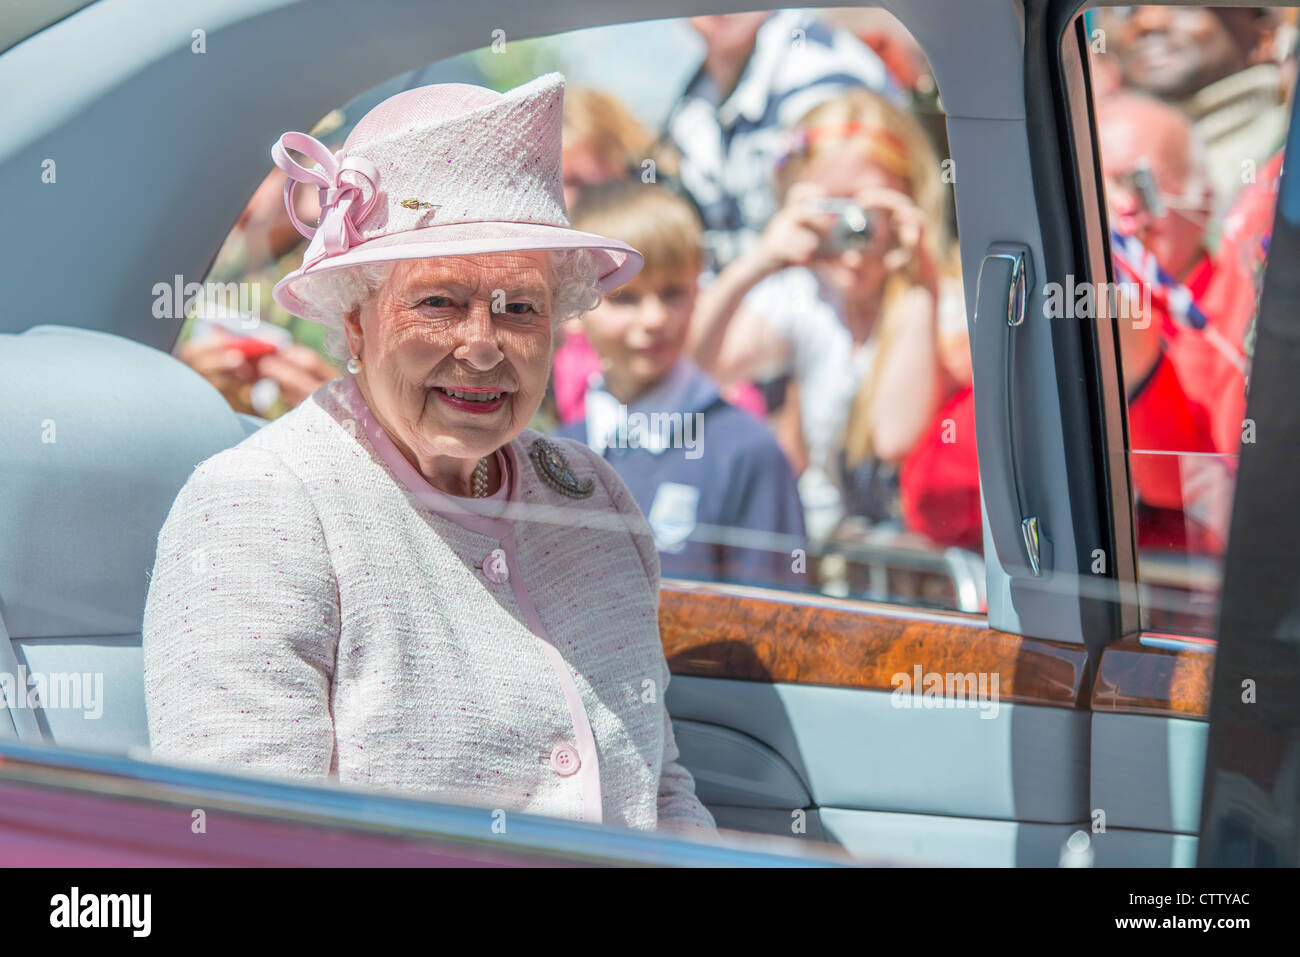 Her Majesty Queen Elizabeth II during the Royal Visit to Worcester to open the new Worcester Library 'The Hive' in July 2012. Stock Photo